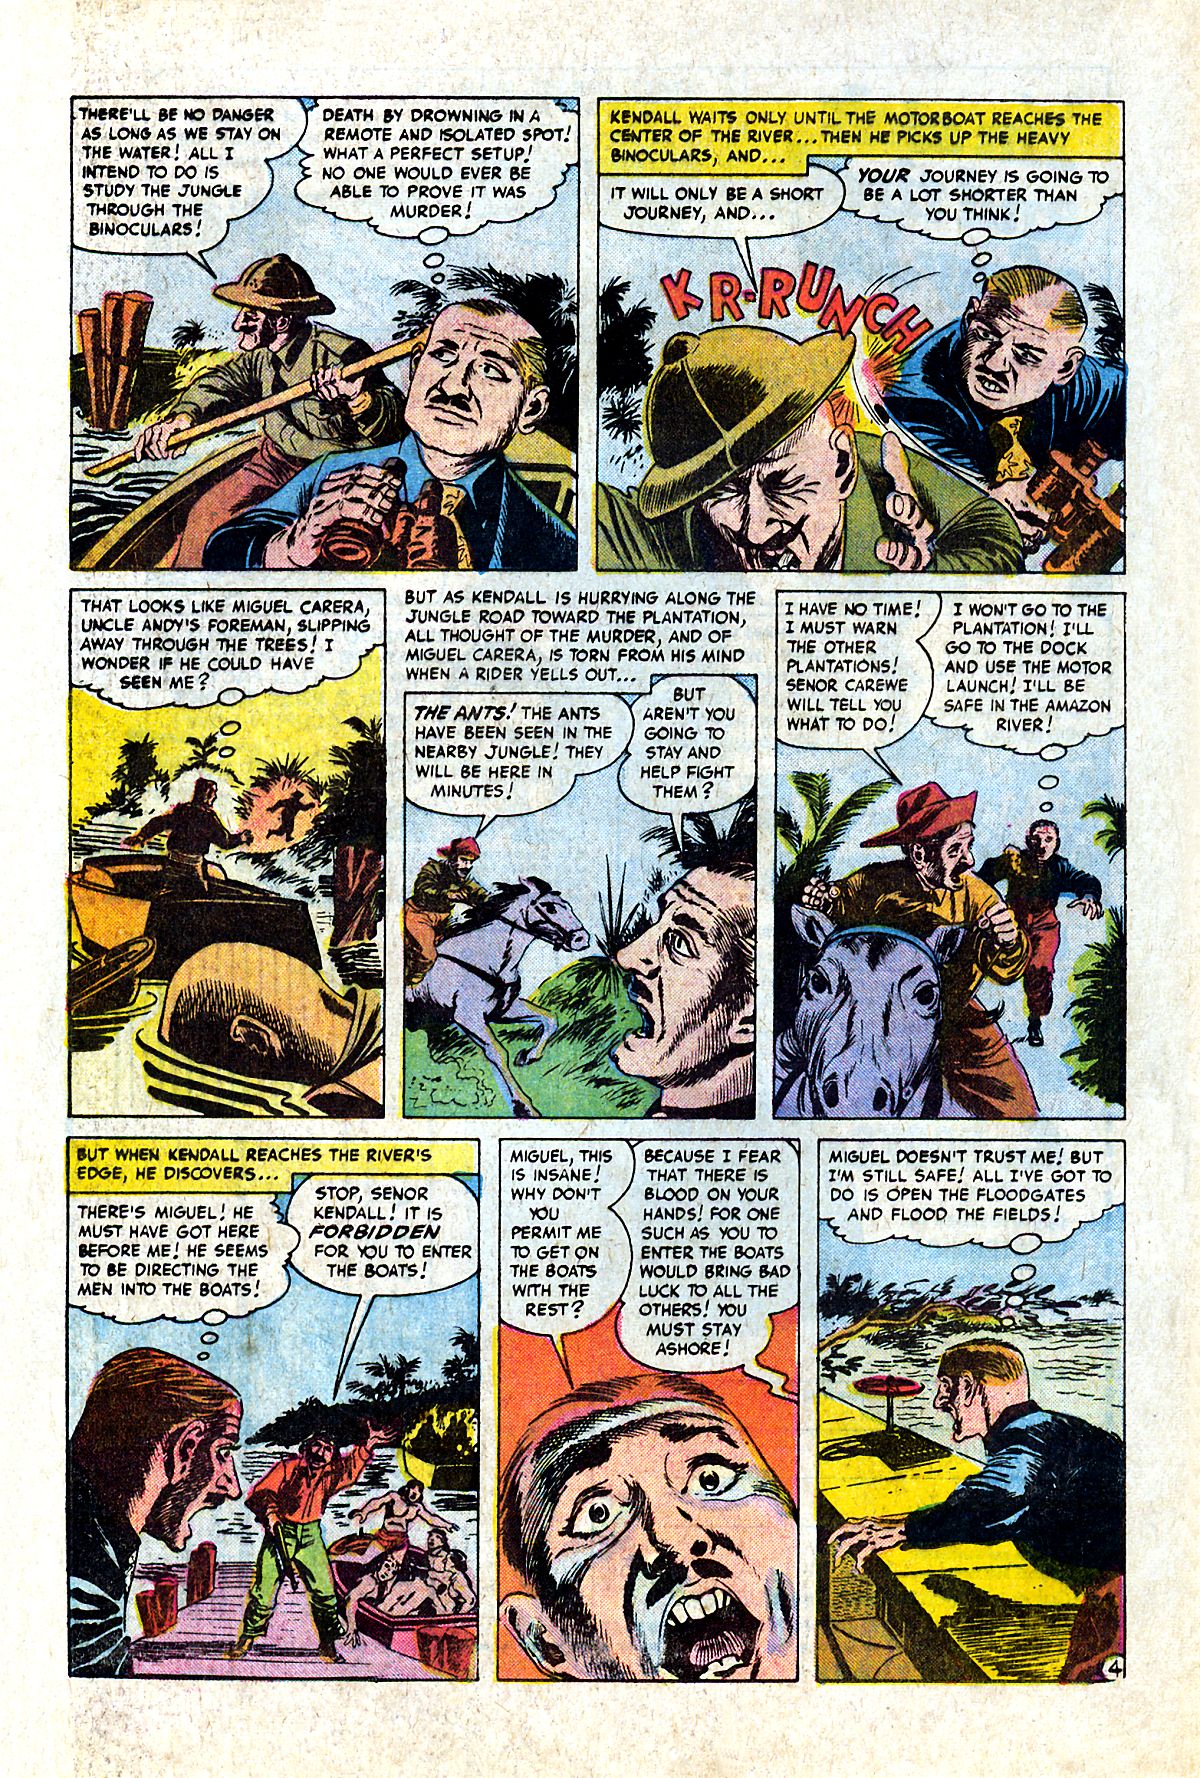 Marvel Tales (1949) 114 Page 22